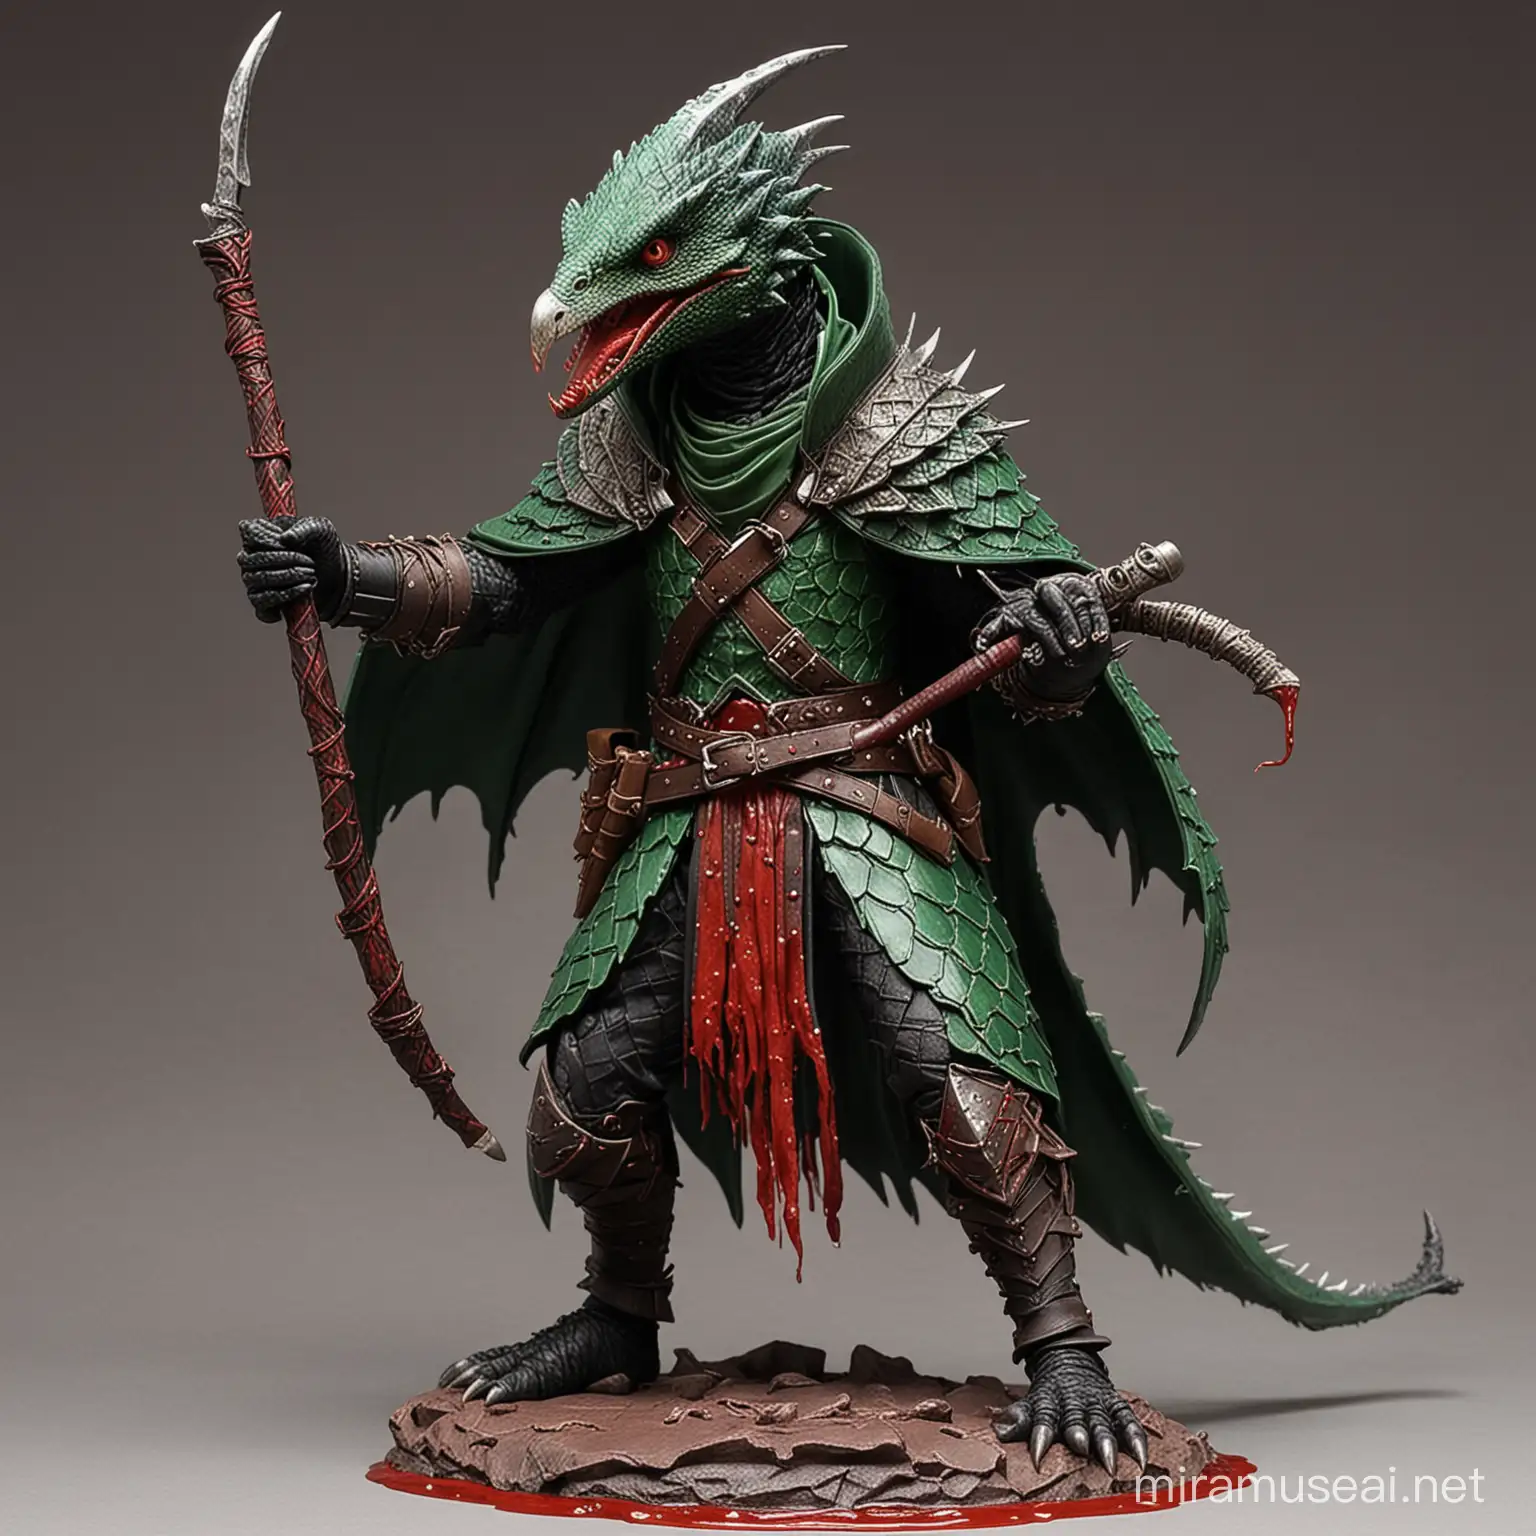 Kenku vampire in green dragon scale armor weilding a green leathery bloody whip, red beady eyes and a bloody black beak